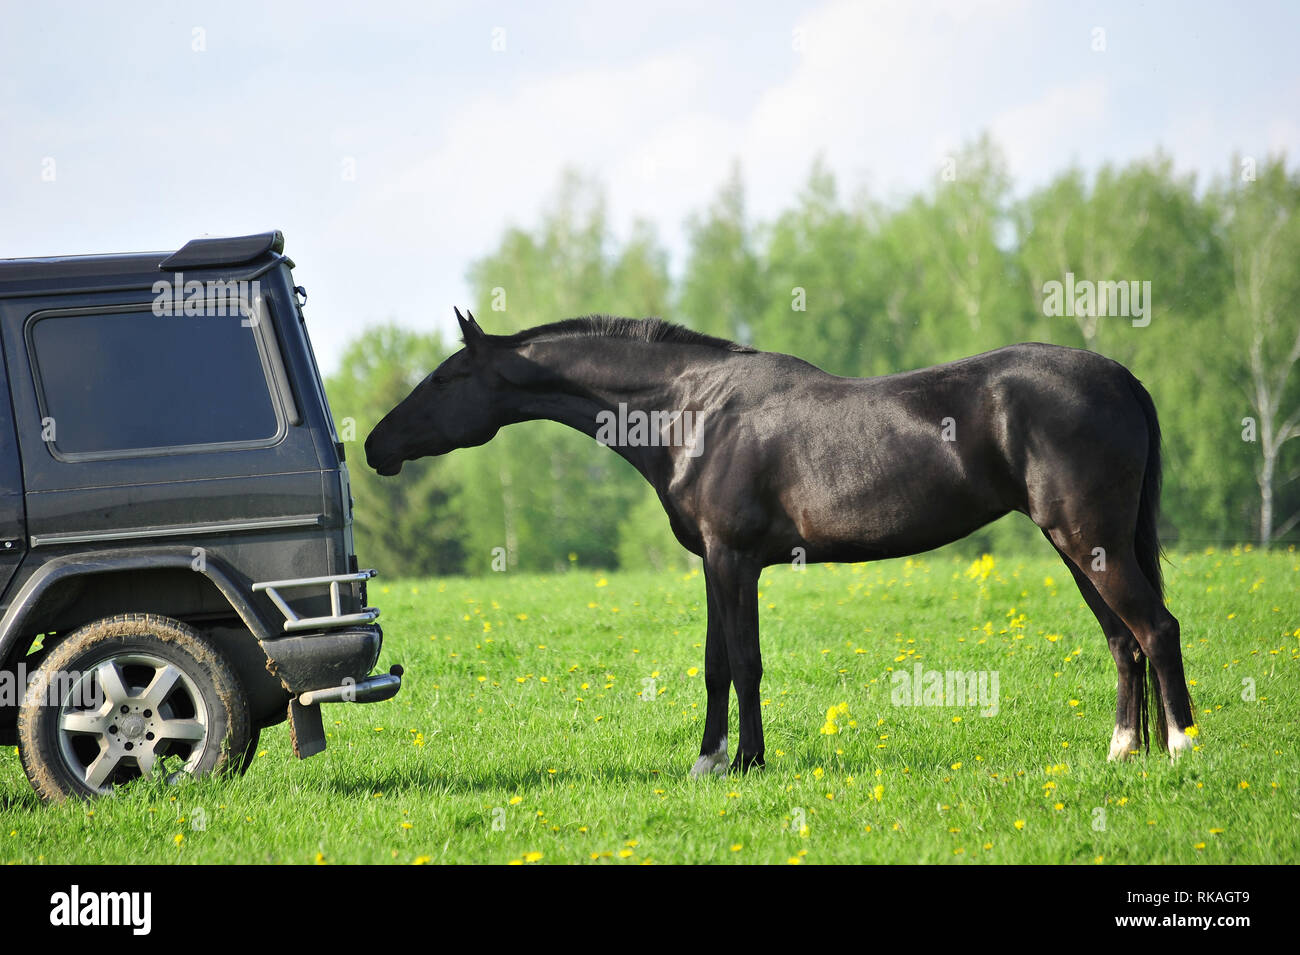 Black curious horse is sniffing a car standing in the green field. Horizontal, side view. Stock Photo